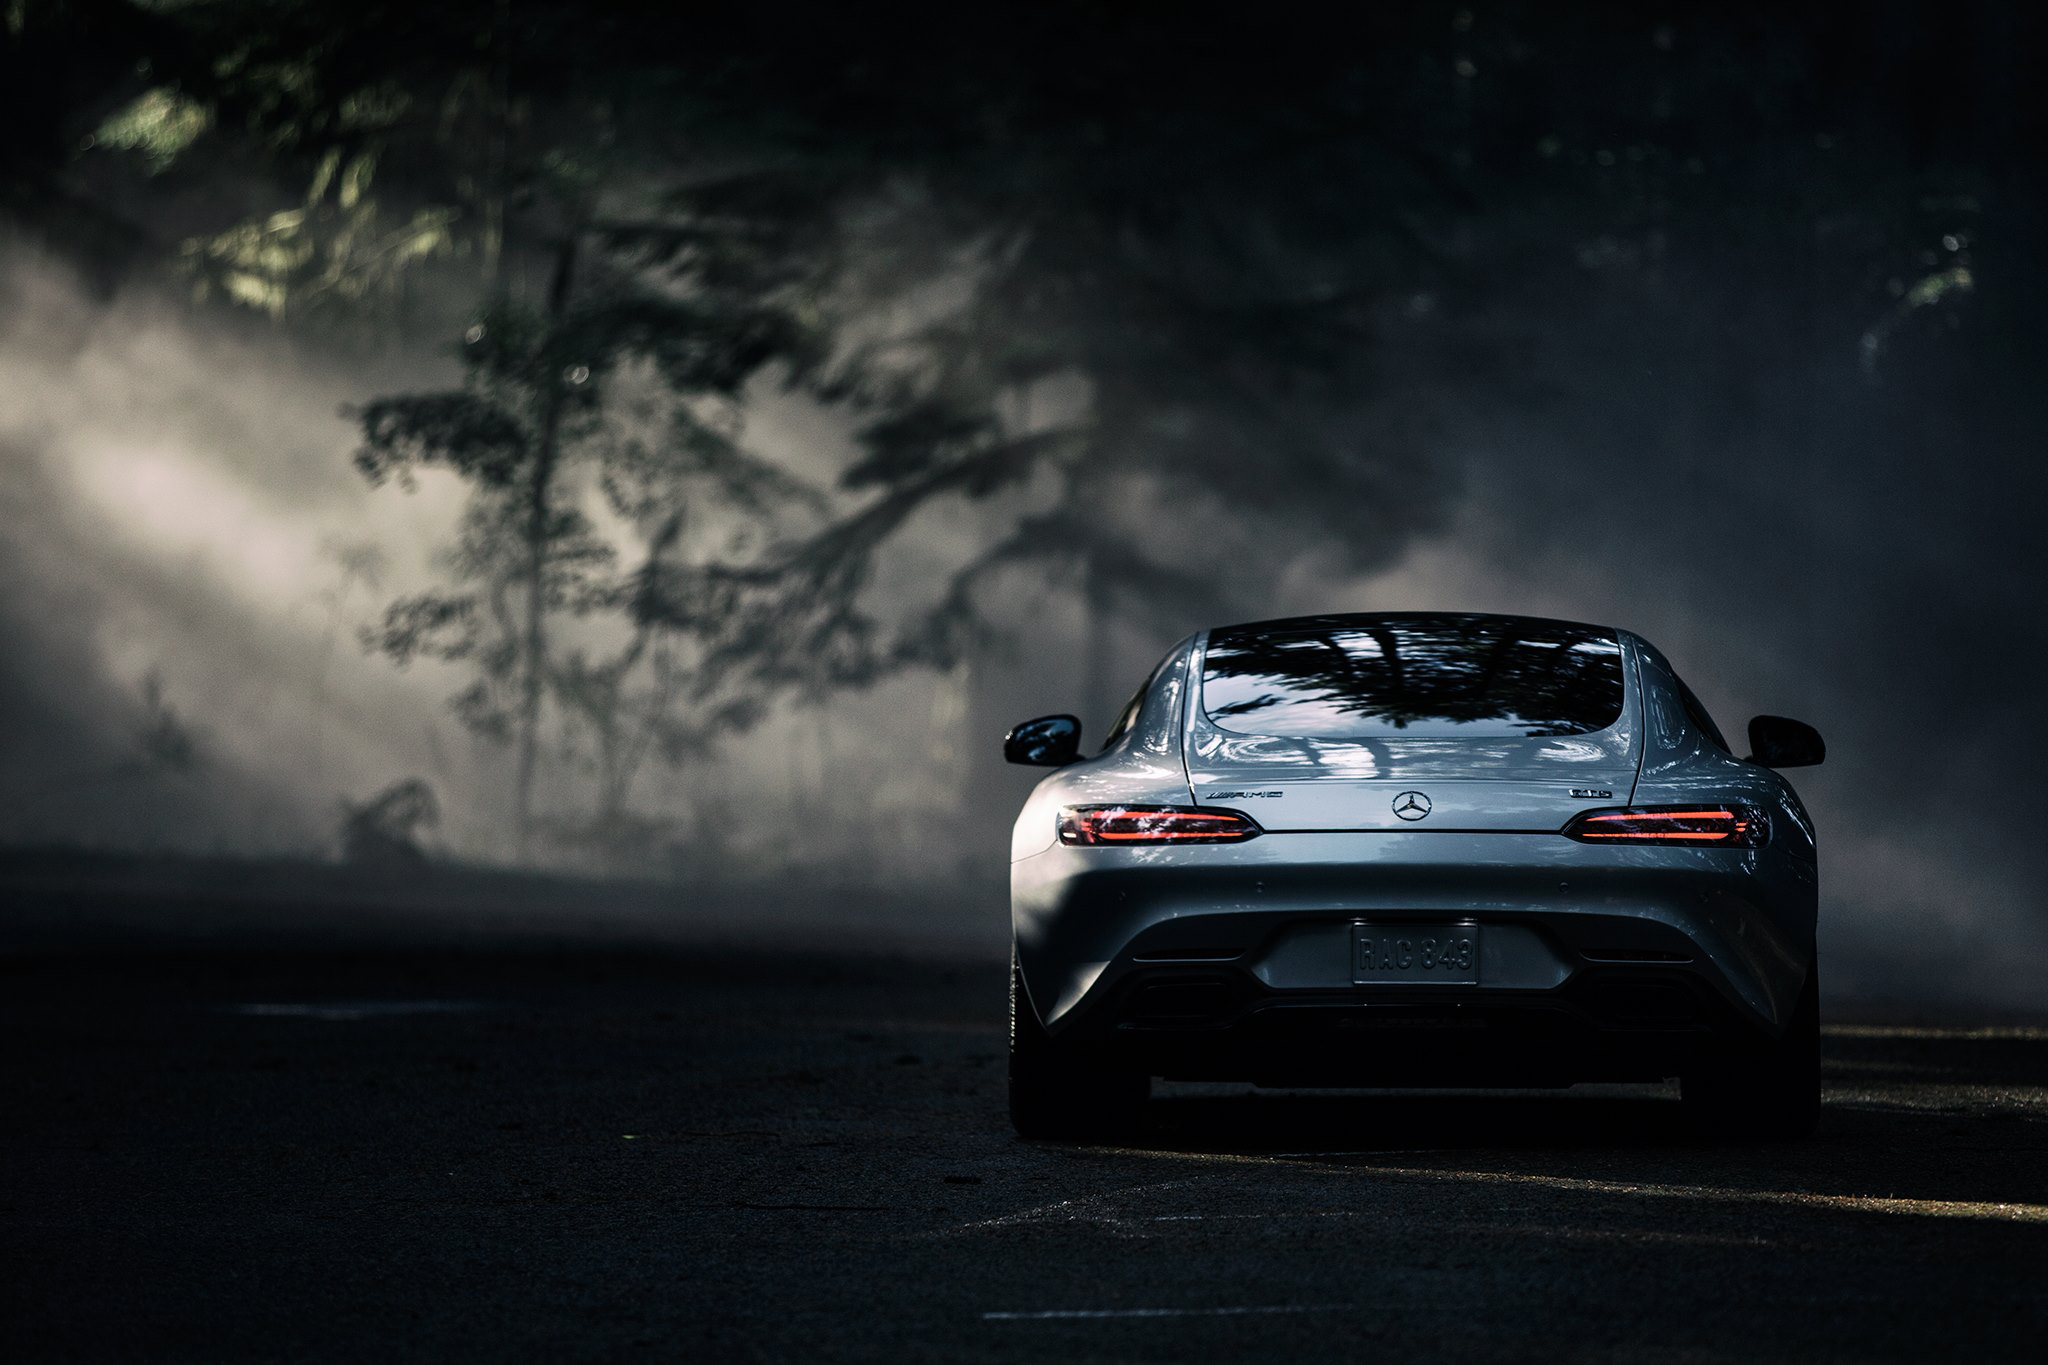 vertical wallpaper cars, mercedes benz, back view, rear view, amg, gt s, 2016